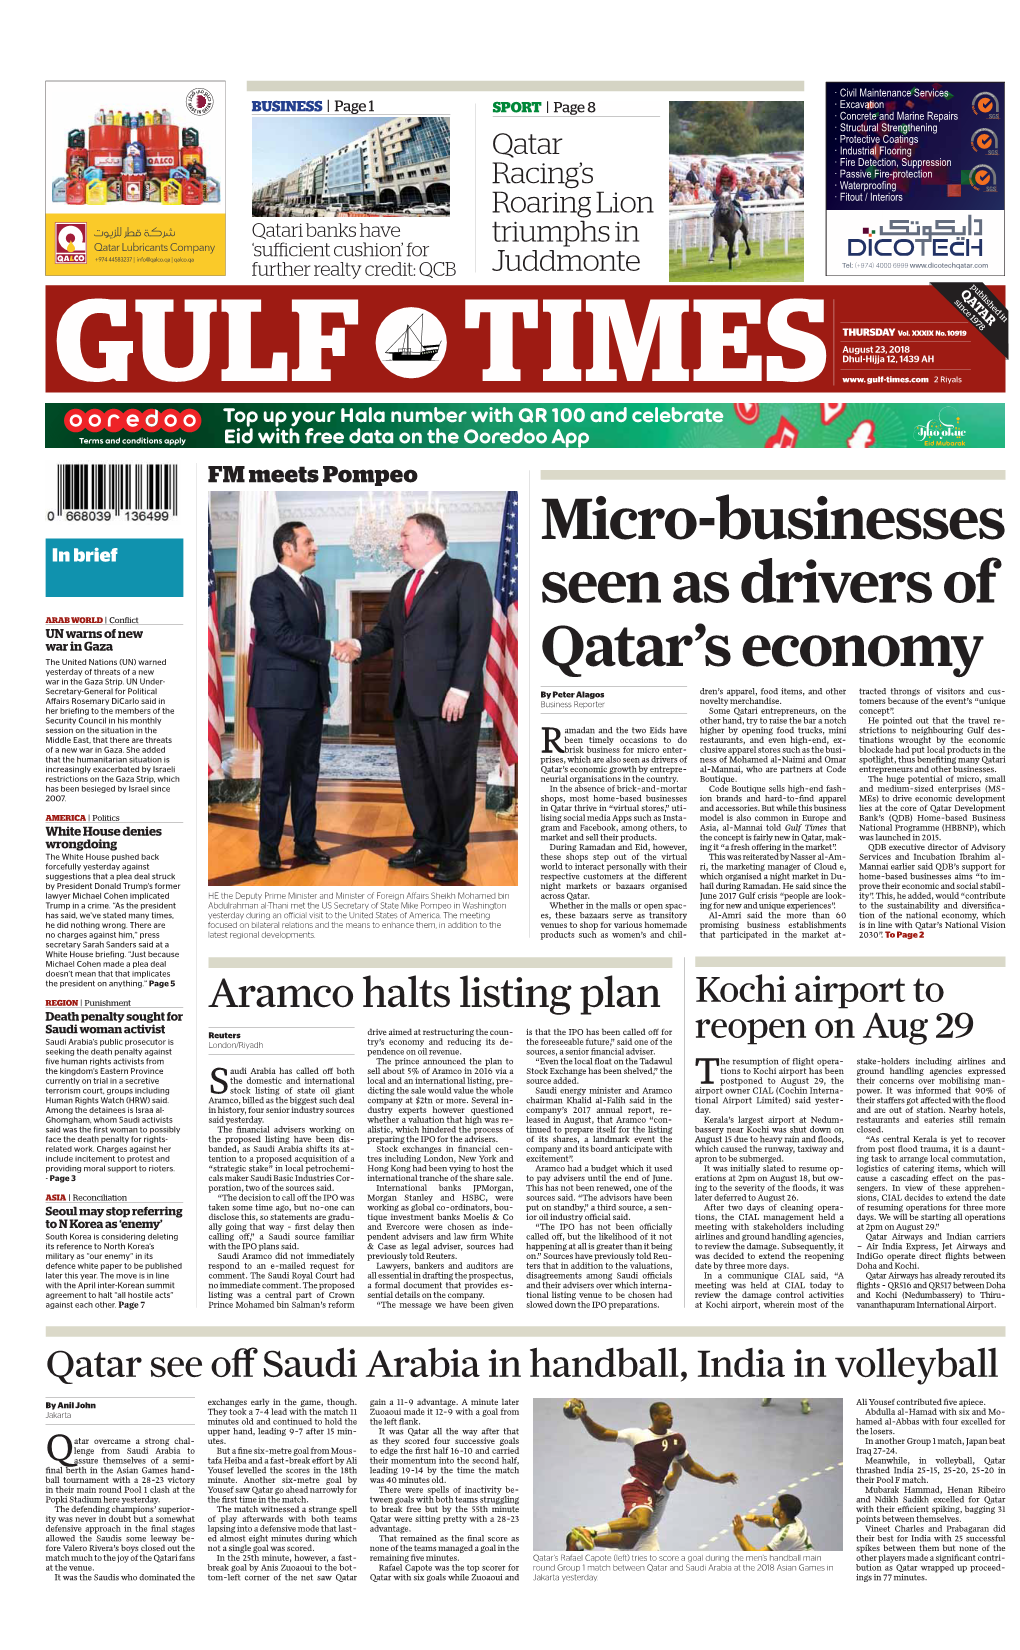 Micro-Businesses Seen As Drivers of Qatar's Economy